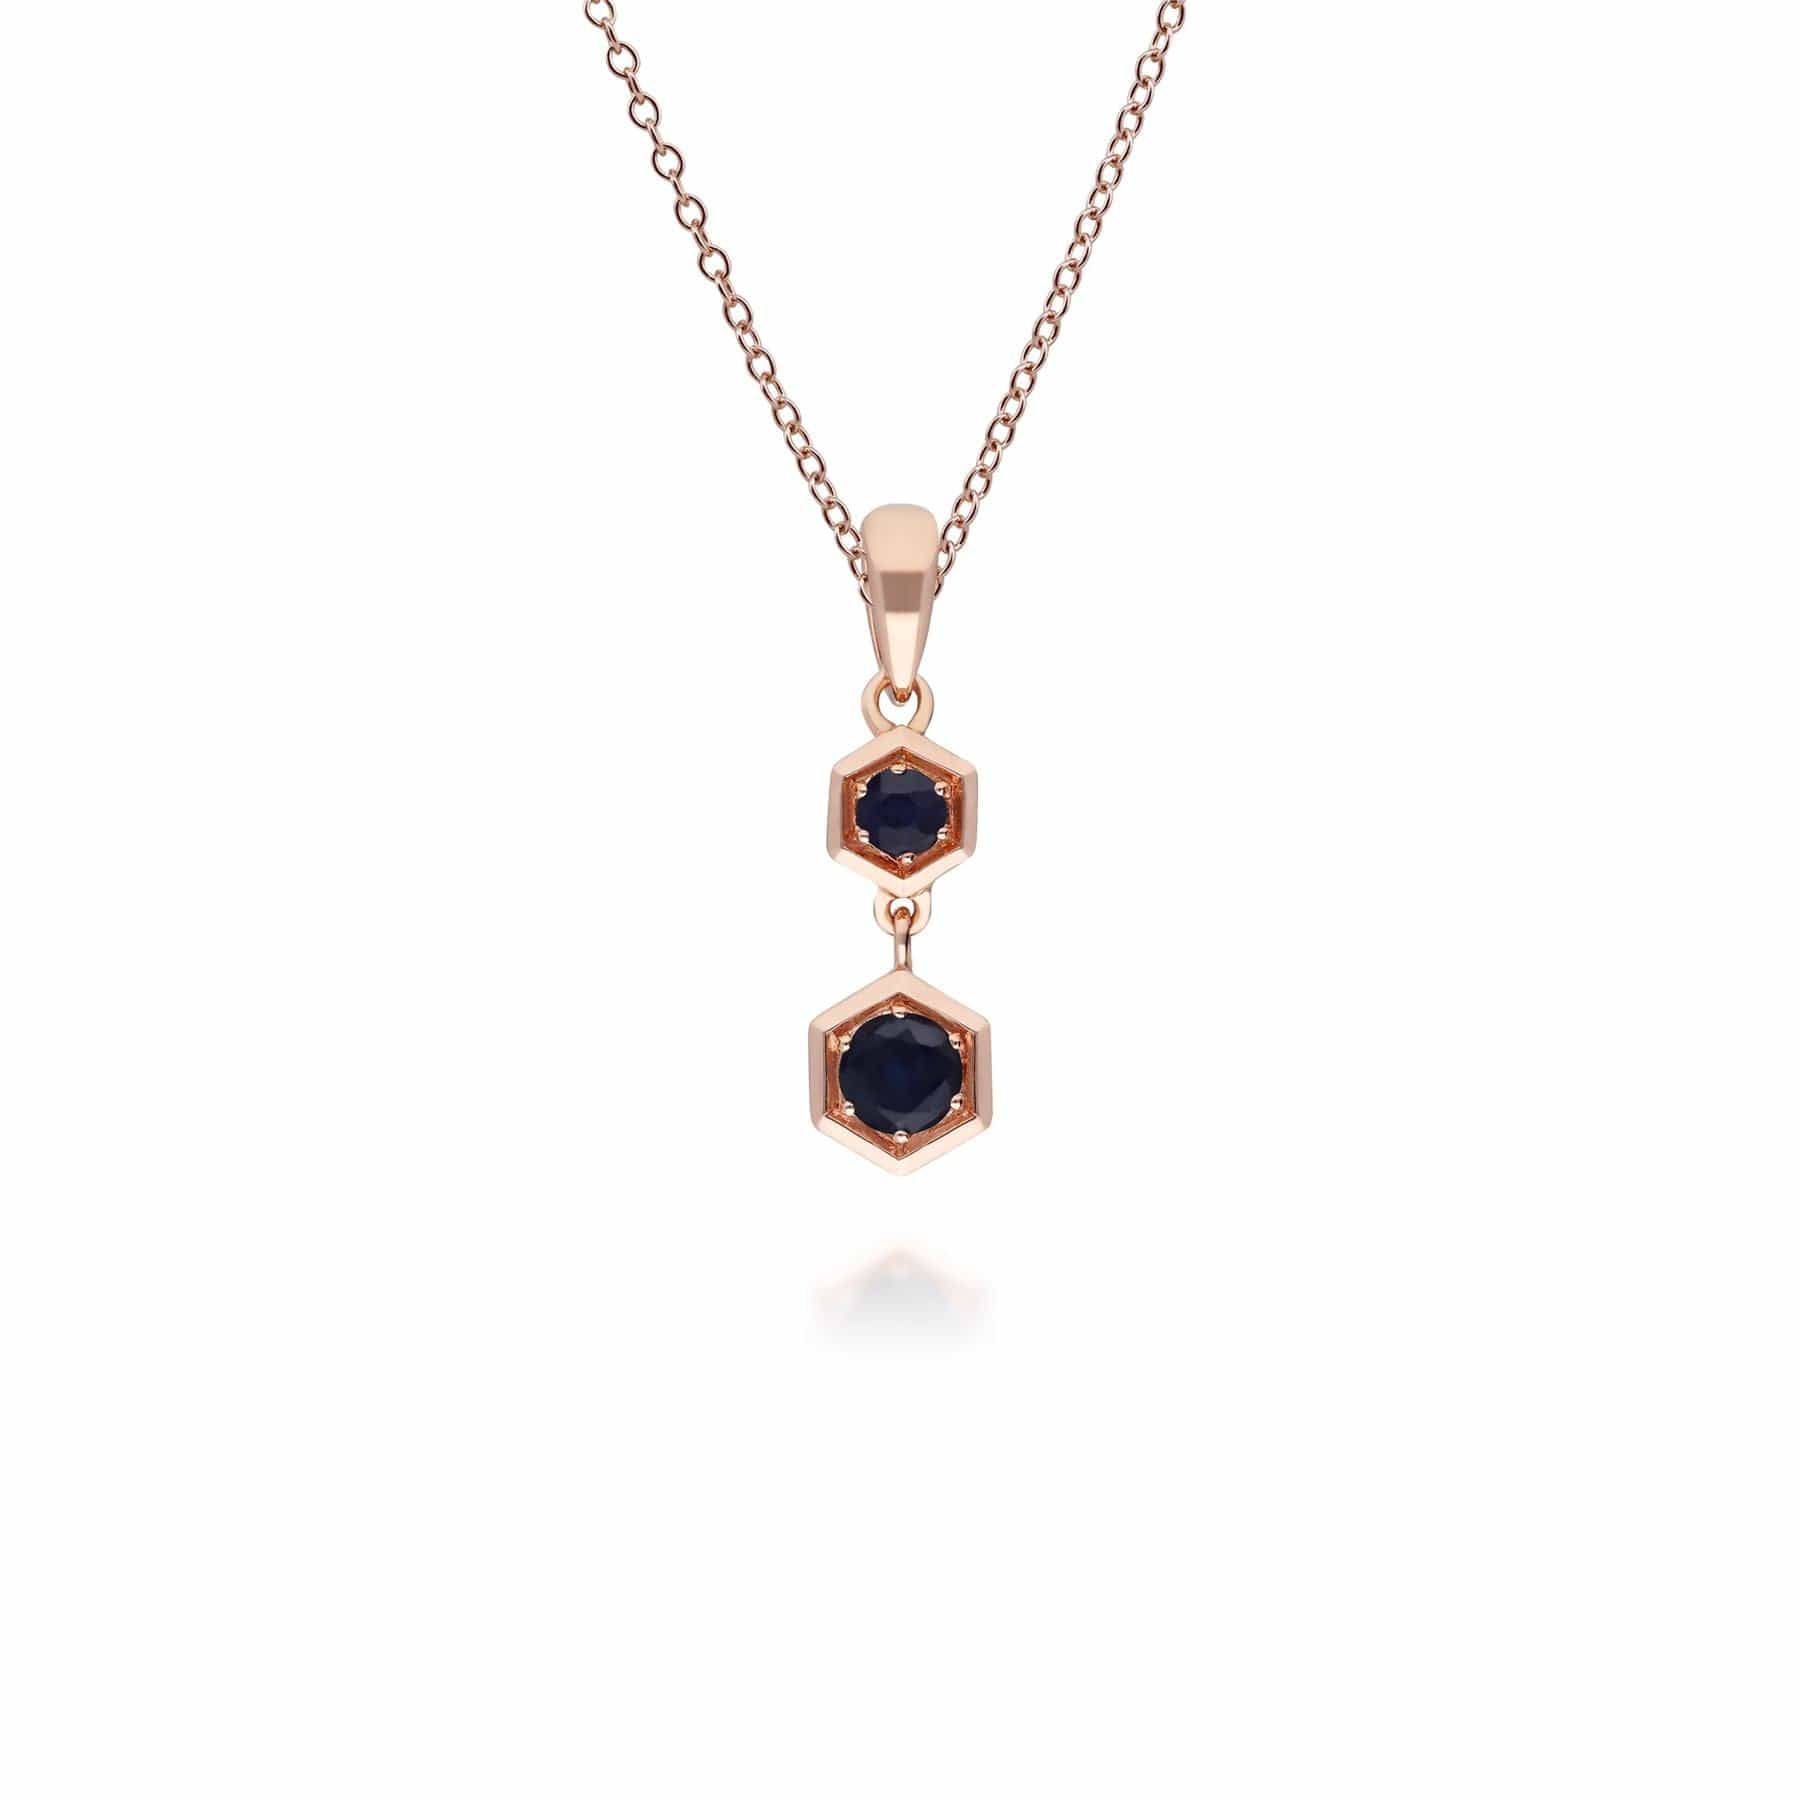 Image of Honeycomb Inspired Sapphire Pendant Necklace in 9ct Rose Gold